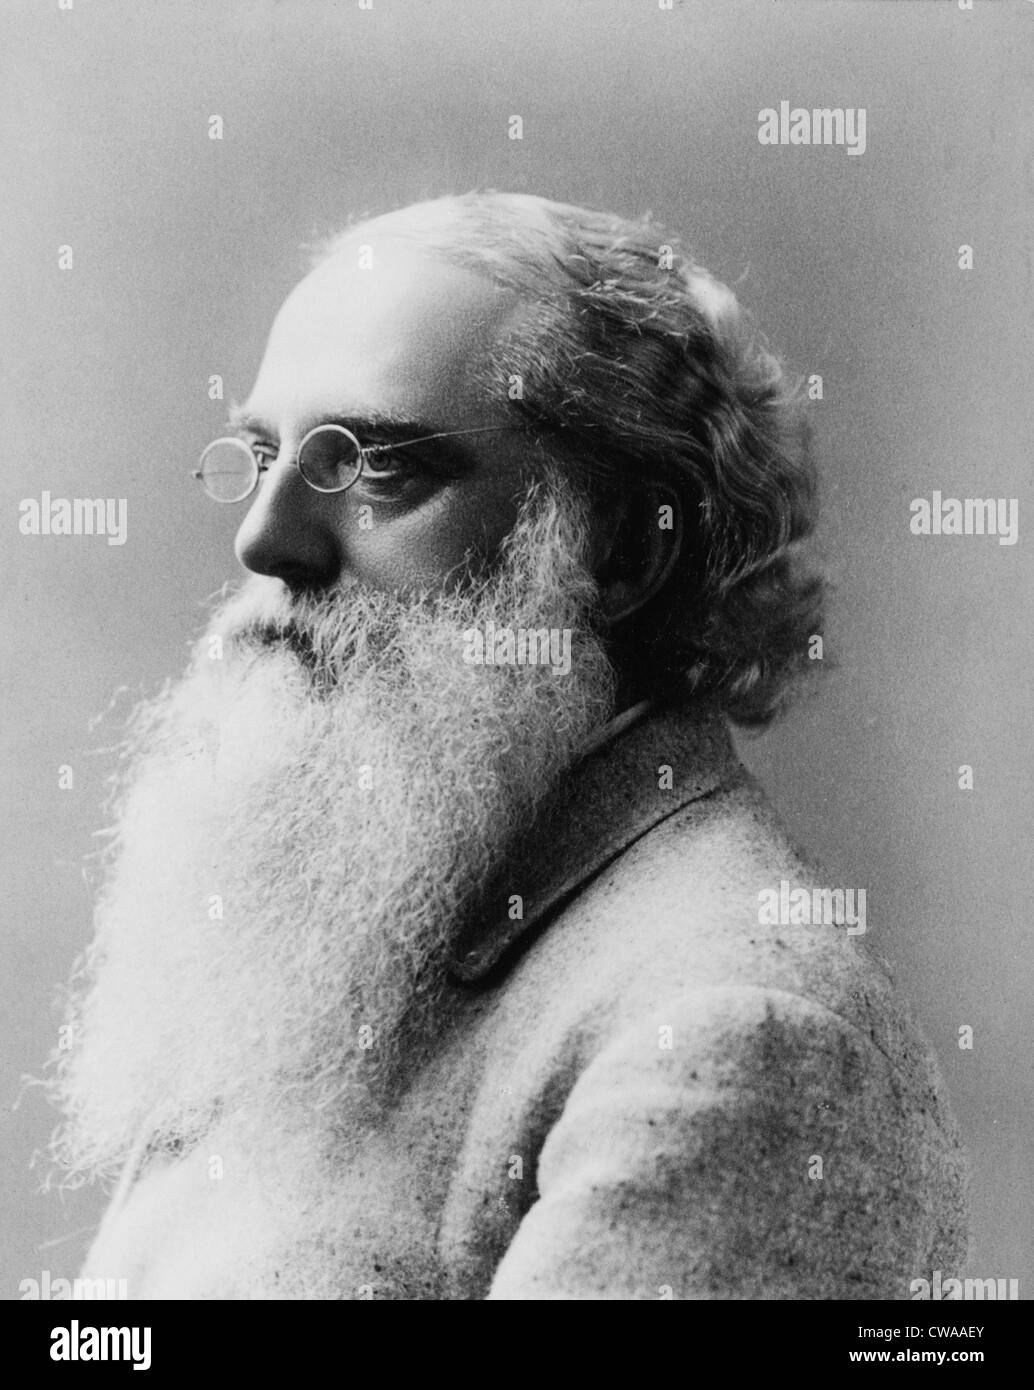 Henry Steel Olcott (1832-1907), American philosopher, and who, with Helena Blavatsky and William Judge, founded  the Stock Photo